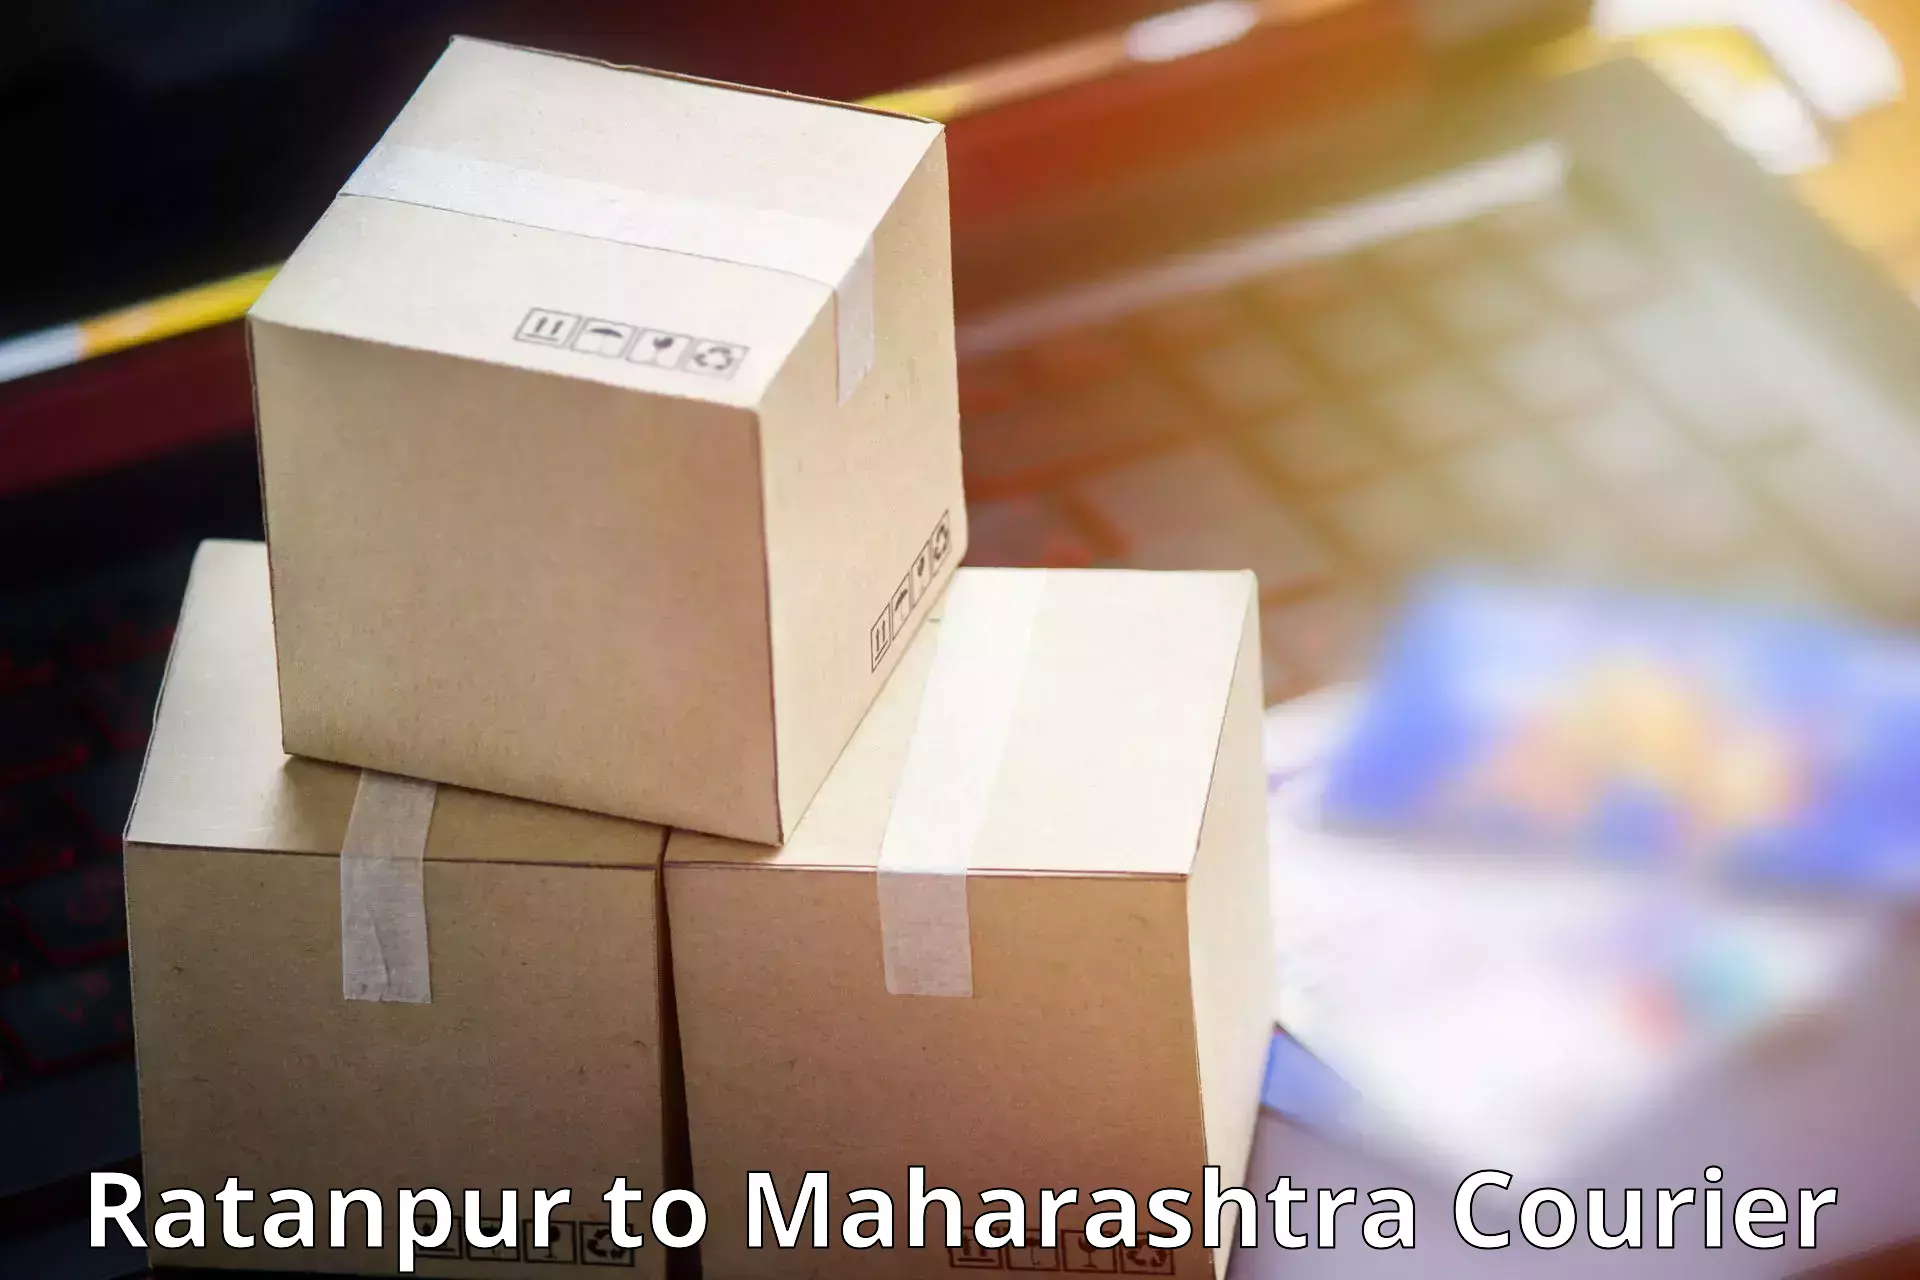 Global courier networks Ratanpur to Khed